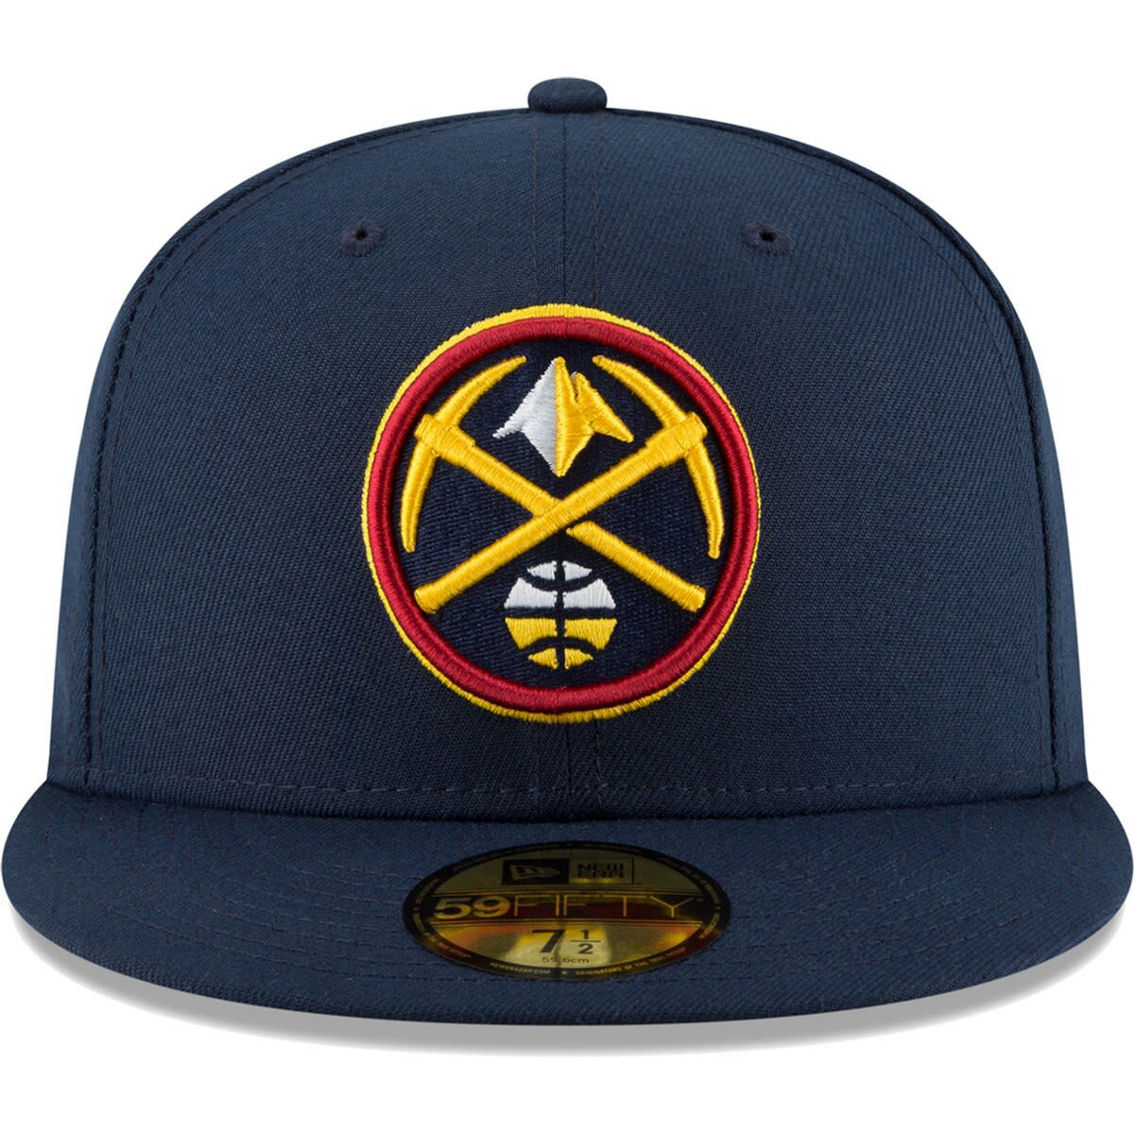 New Era Men's Navy Denver Nuggets Team 59FIFTY Fitted Hat - Image 3 of 4